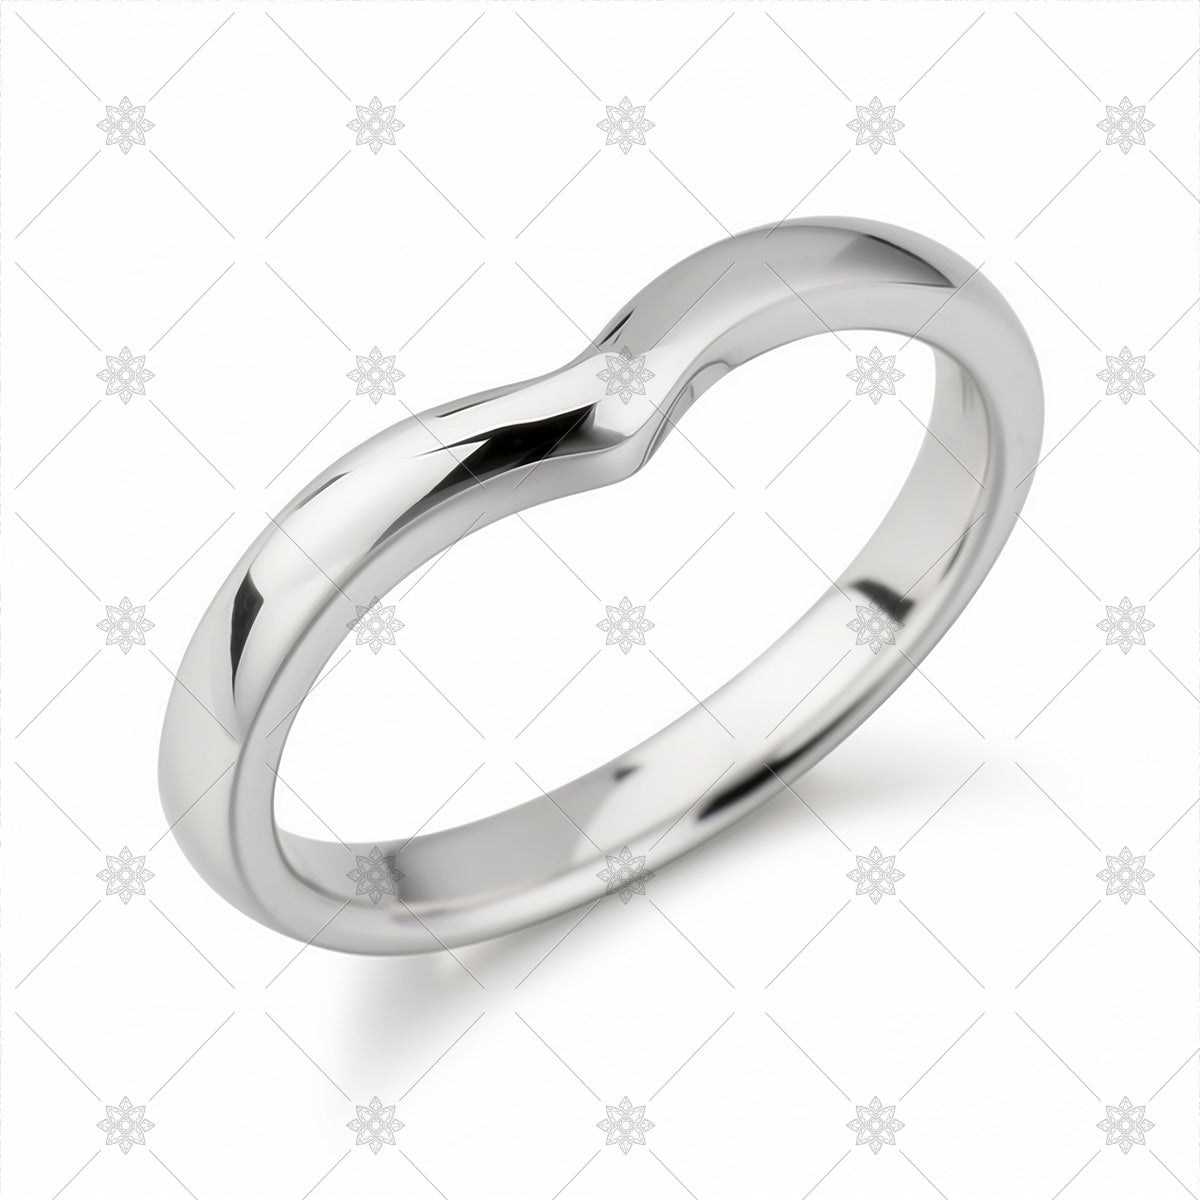 ChicSilver Minimalist Sterling Silver Ring for Women 2mm Thin Wedding Band  Stacking Ring Round Plain Bridal Band Size 6 - Walmart.com